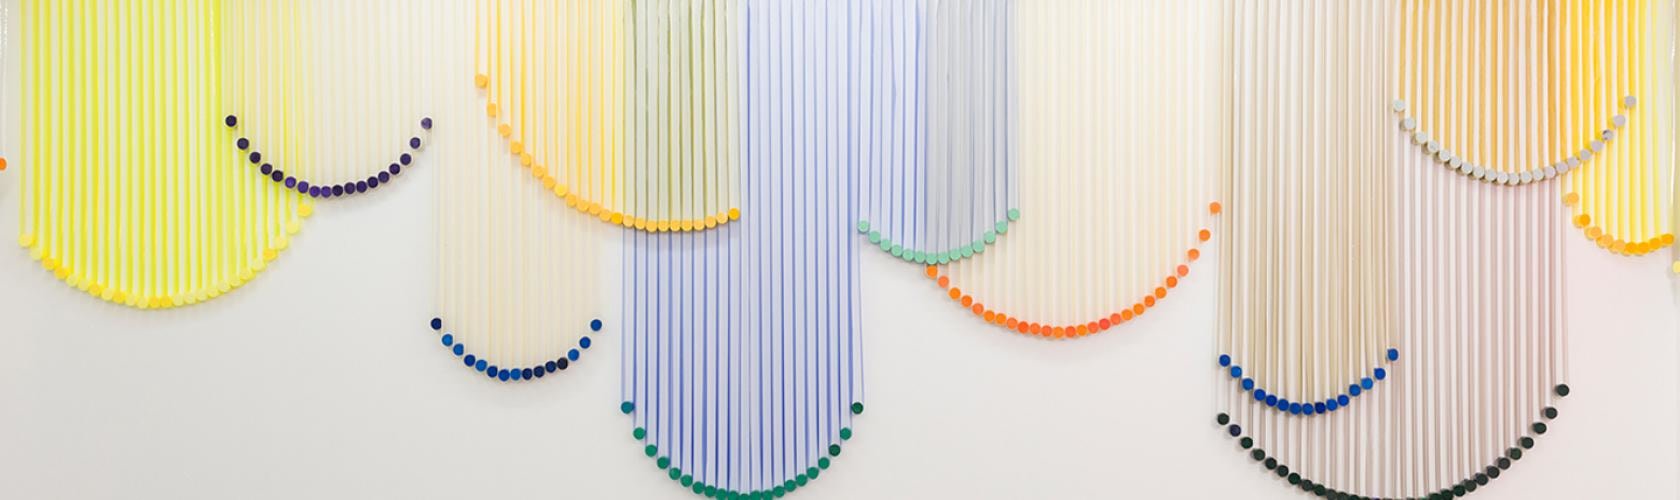 Vertical ribbons installed on wall as artwork